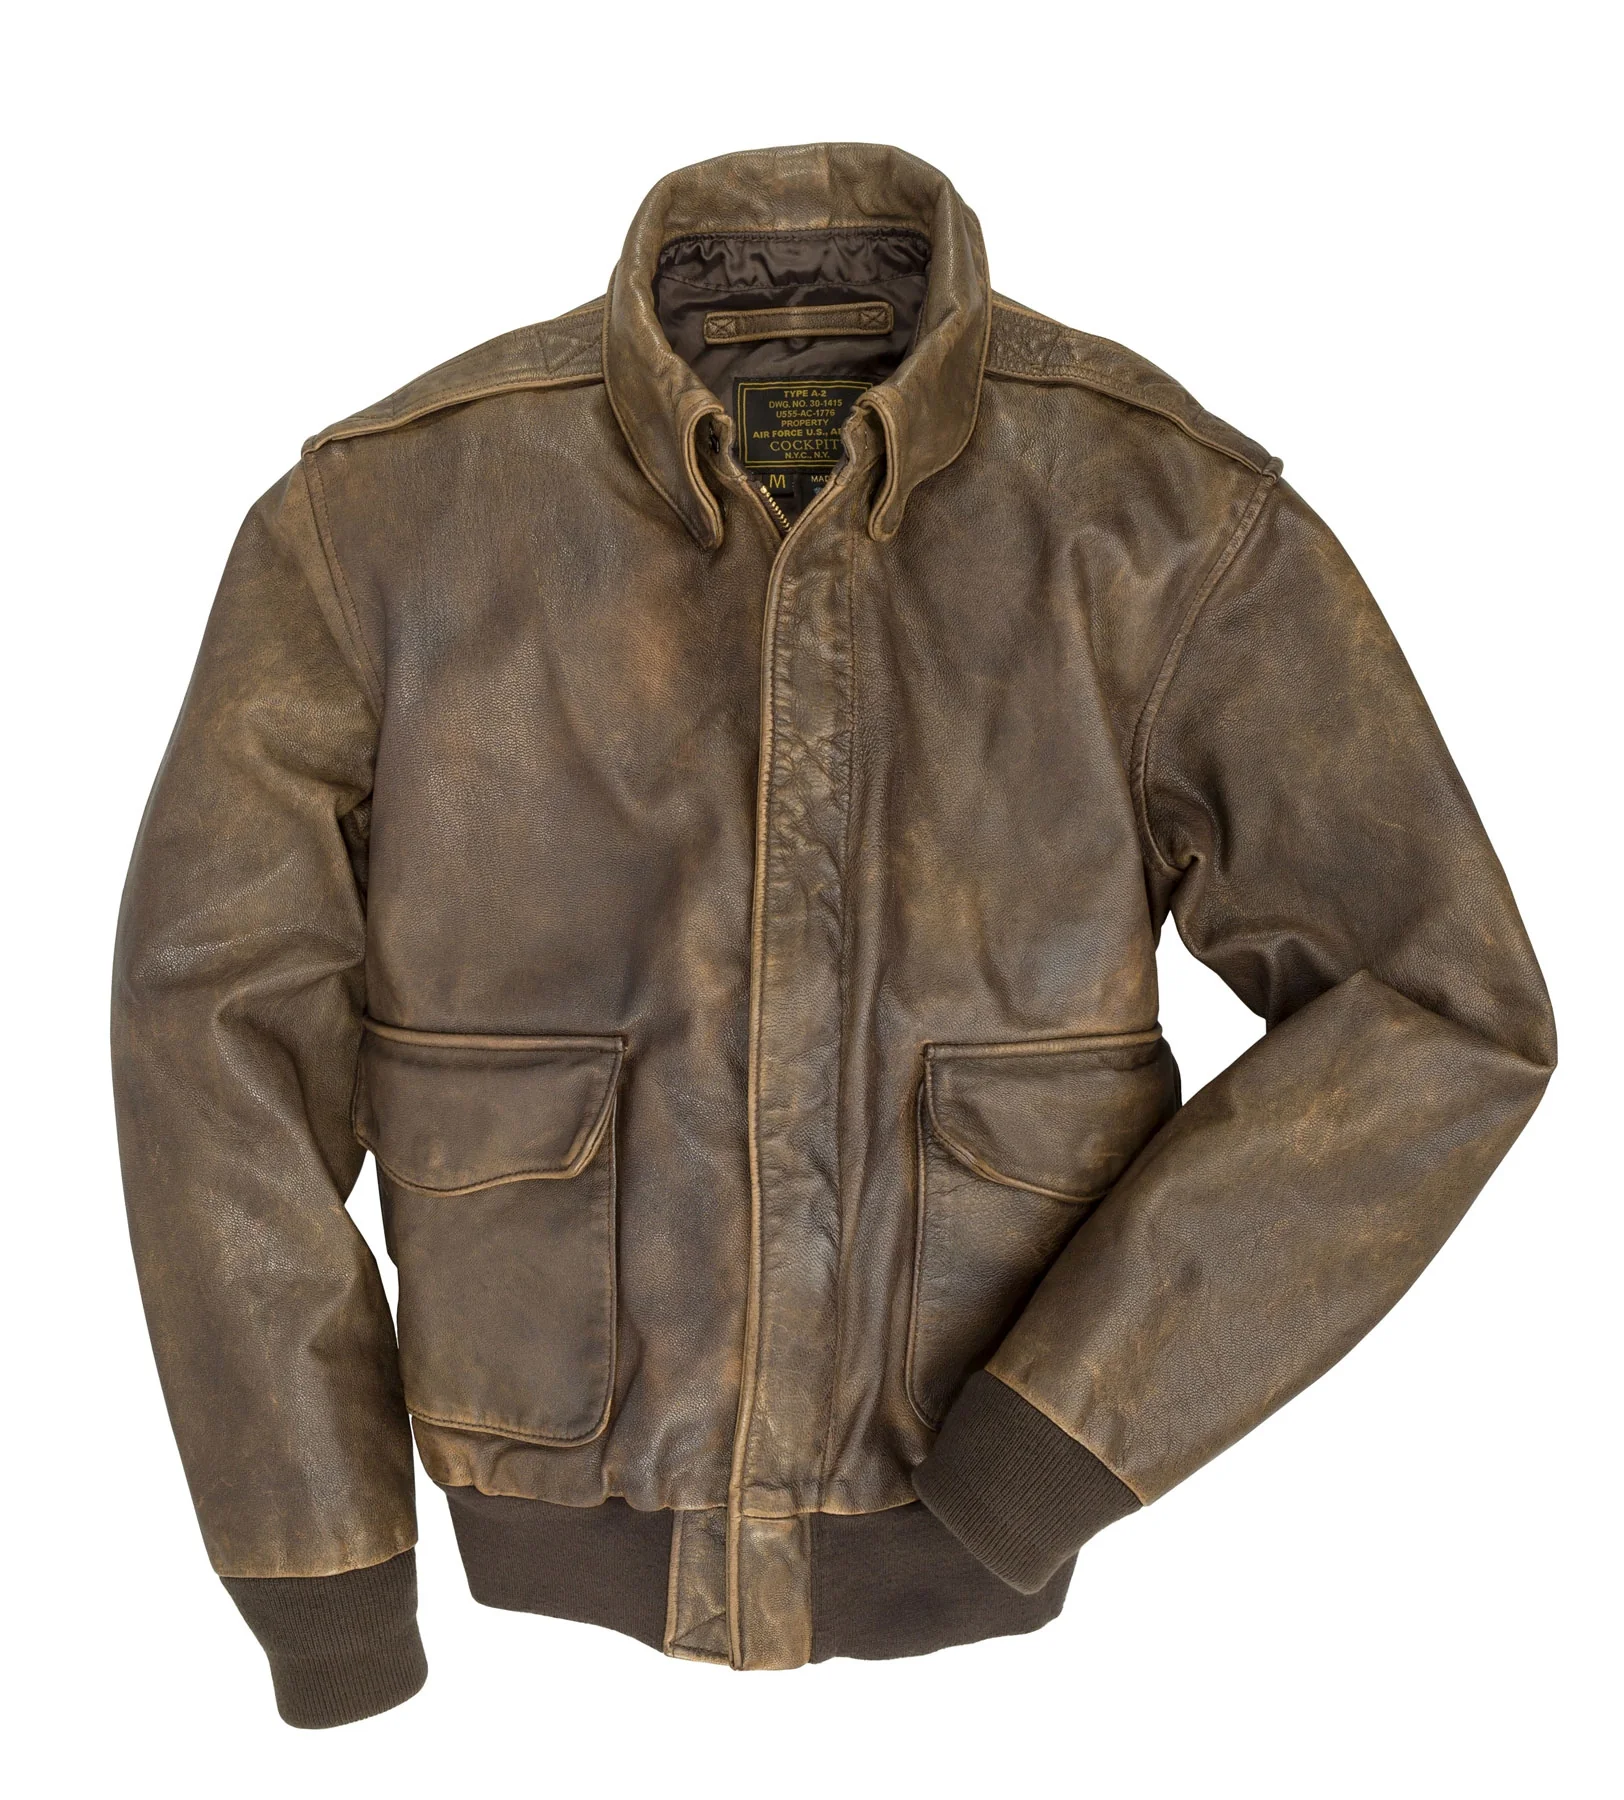 This image portrays A-2 Leather Flight Jacket by Government Suppliers & Associates.